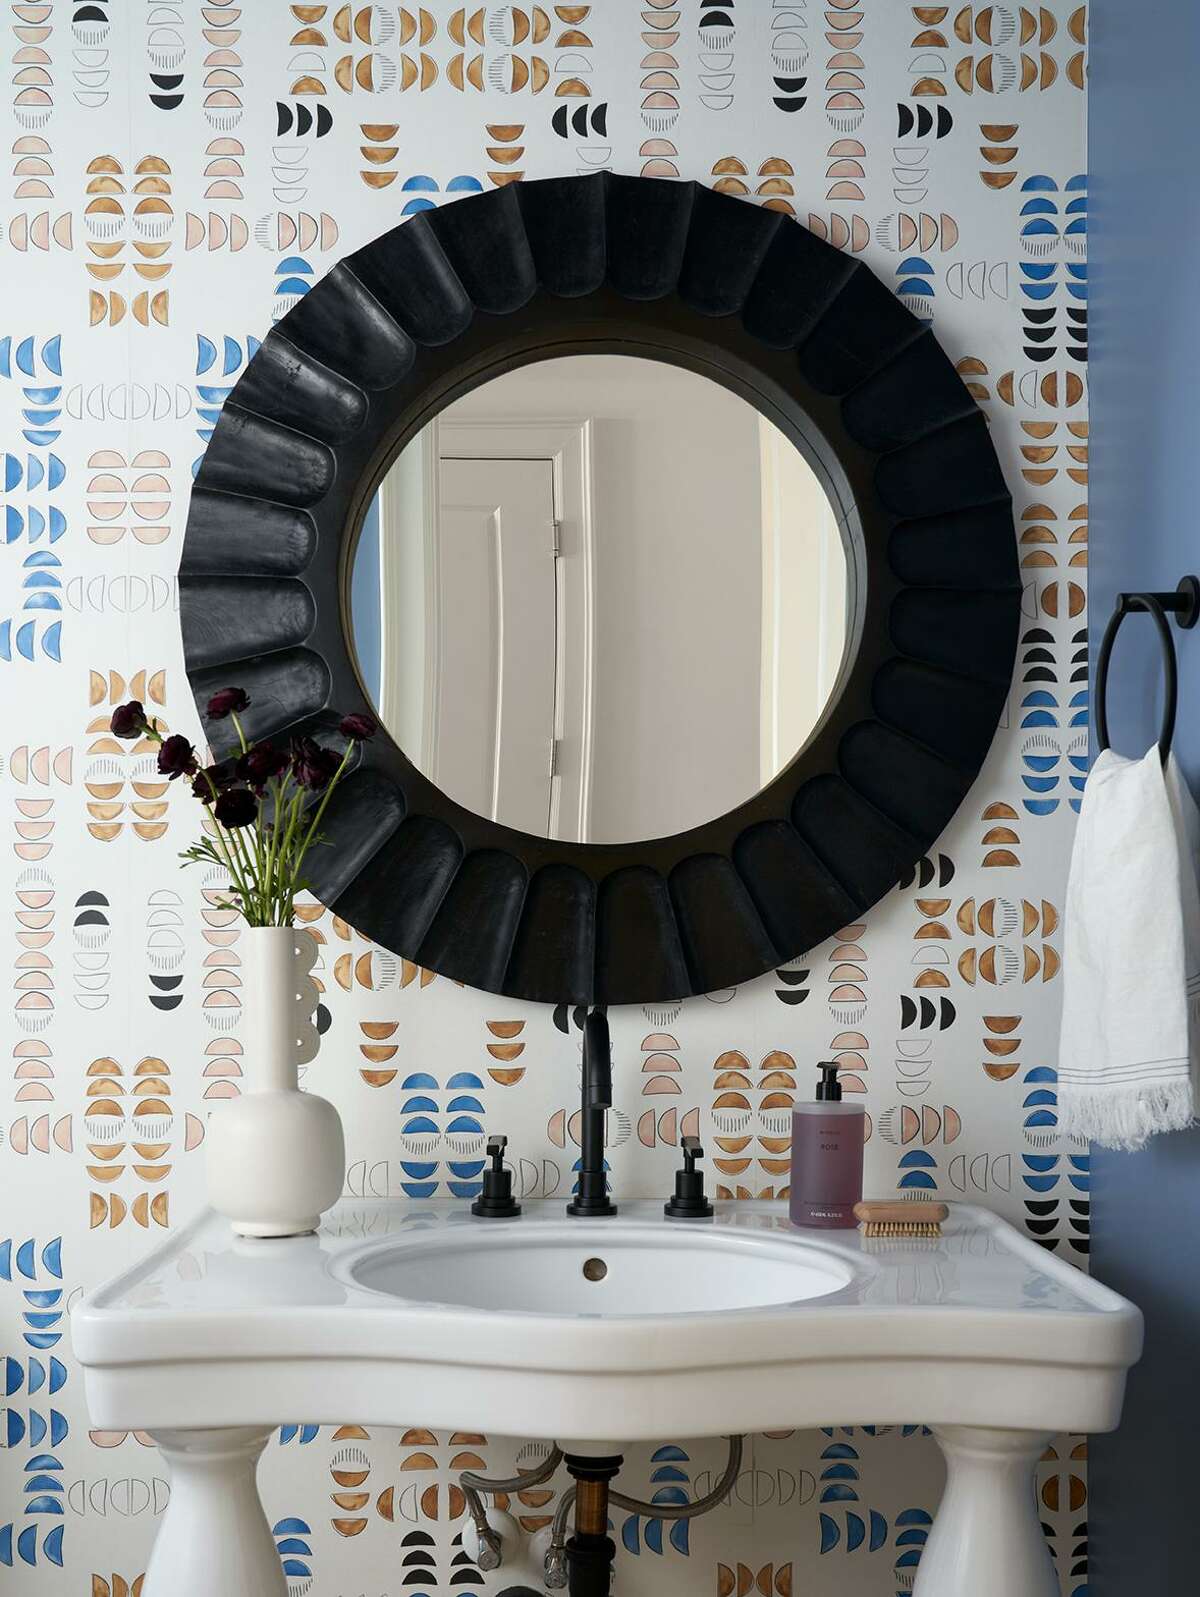 Plumbing fixtures in black matte were paired with a new, framed mirror in the powder bathroom.